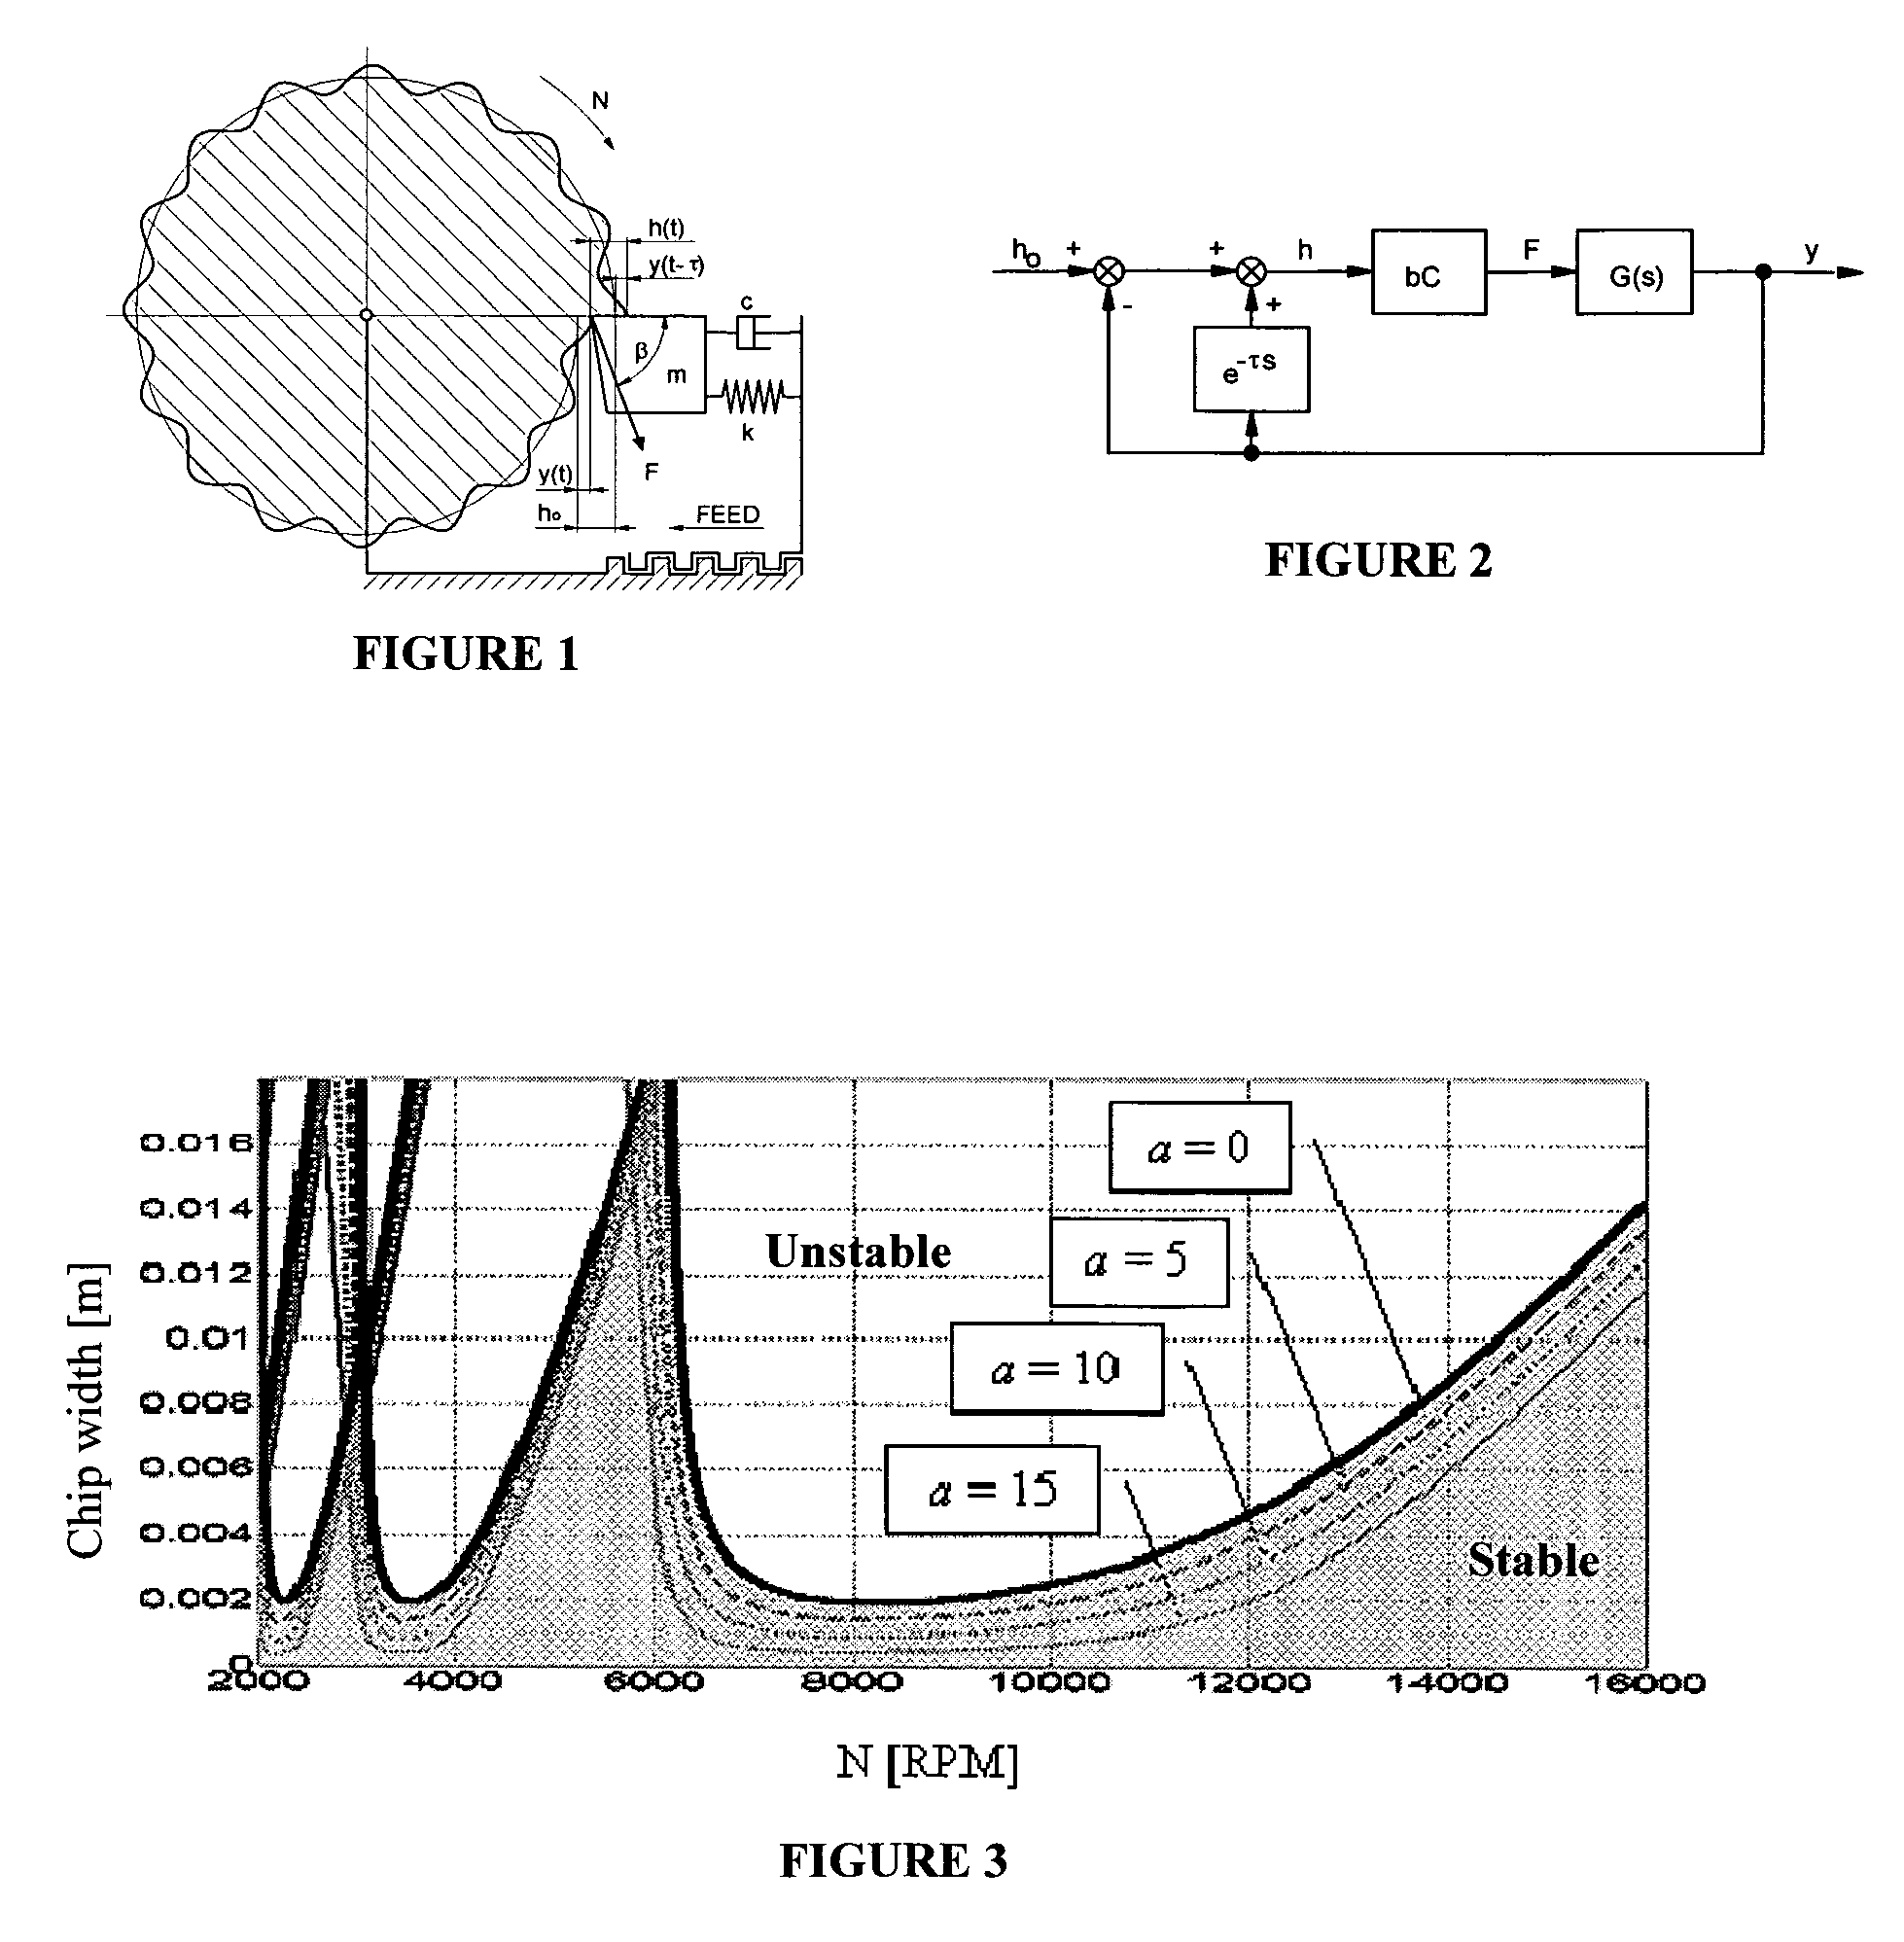 System and method for chatter stability prediction and control in simultaneous machining applications